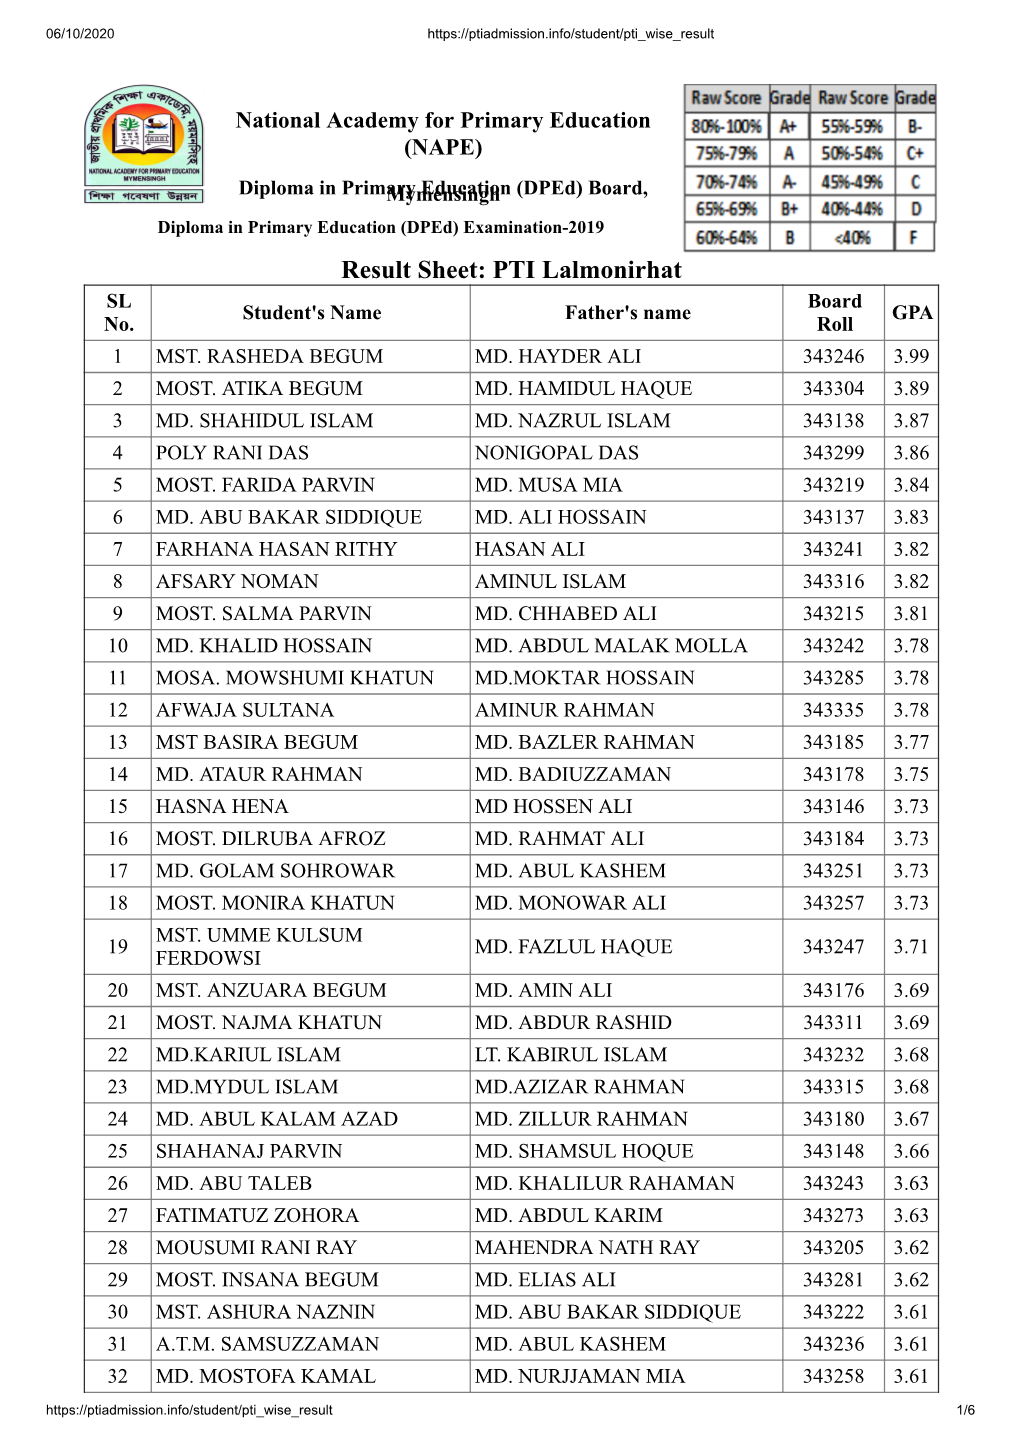 Result Sheet: PTI Lalmonirhat SL Board Student's Name Father's Name GPA No